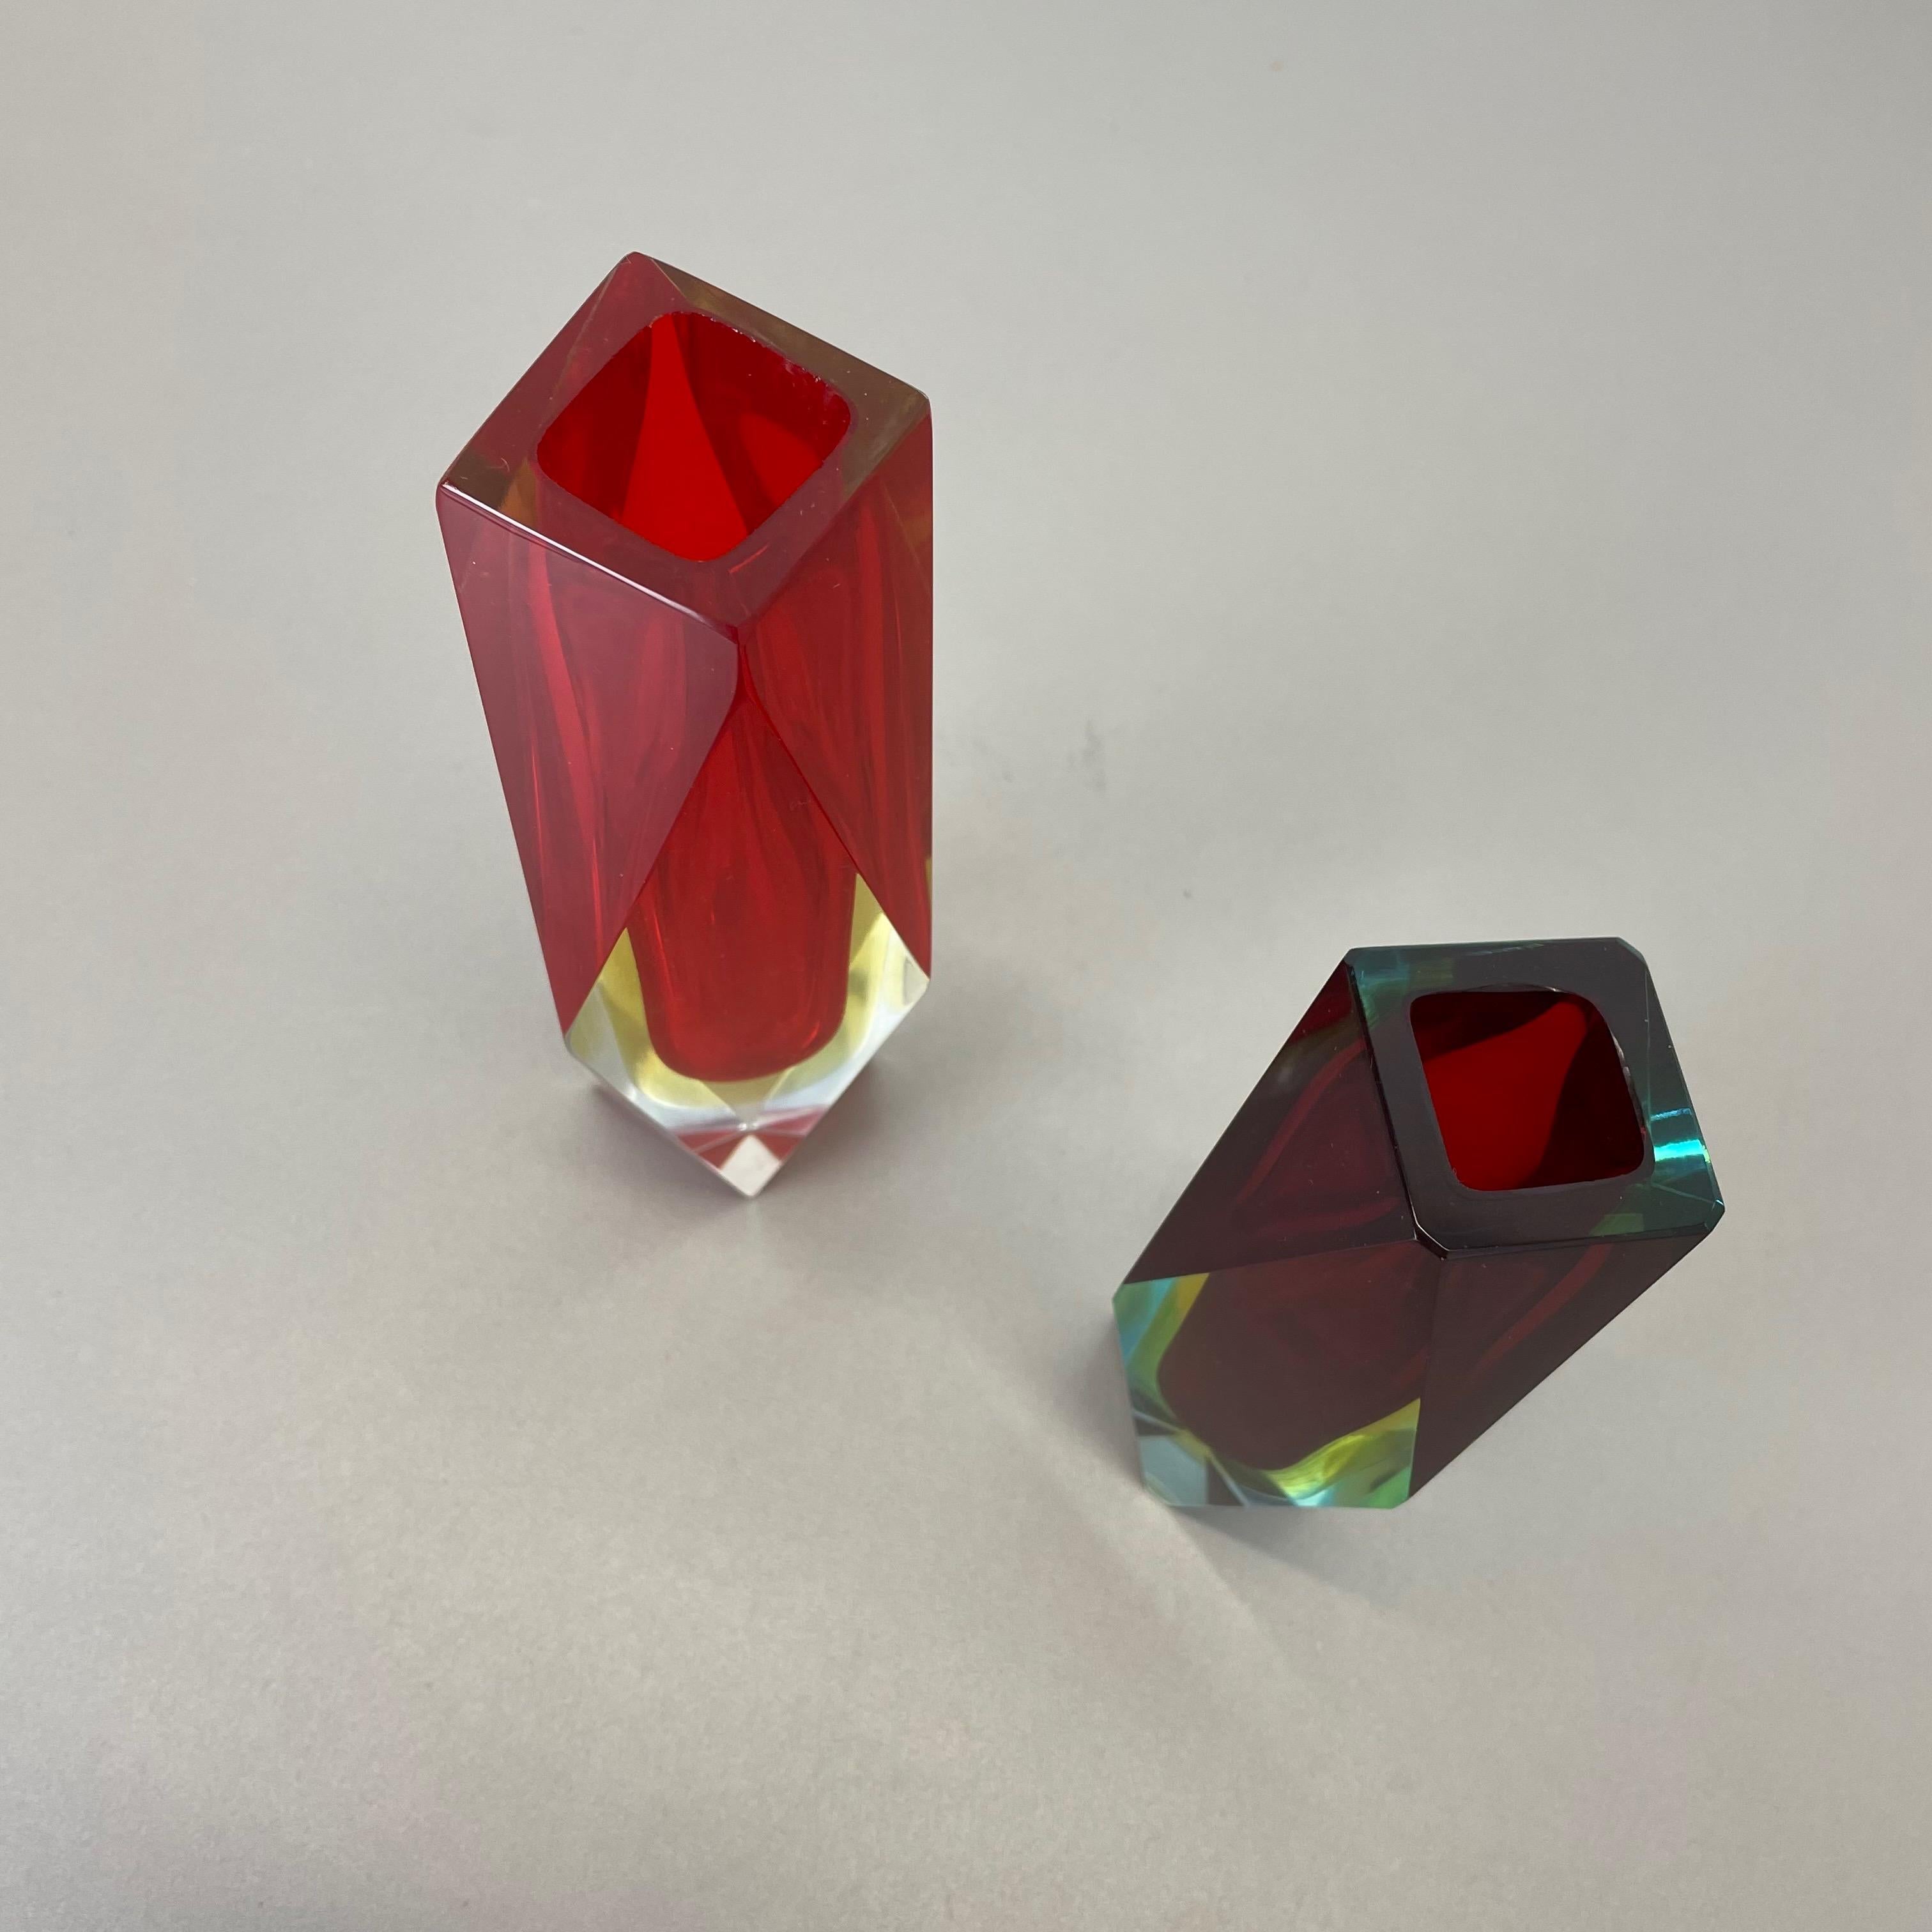 Set of 2 Faceted Murano Glass Sommerso Vase Designed by Flavio Poli Italy, 1970s For Sale 9